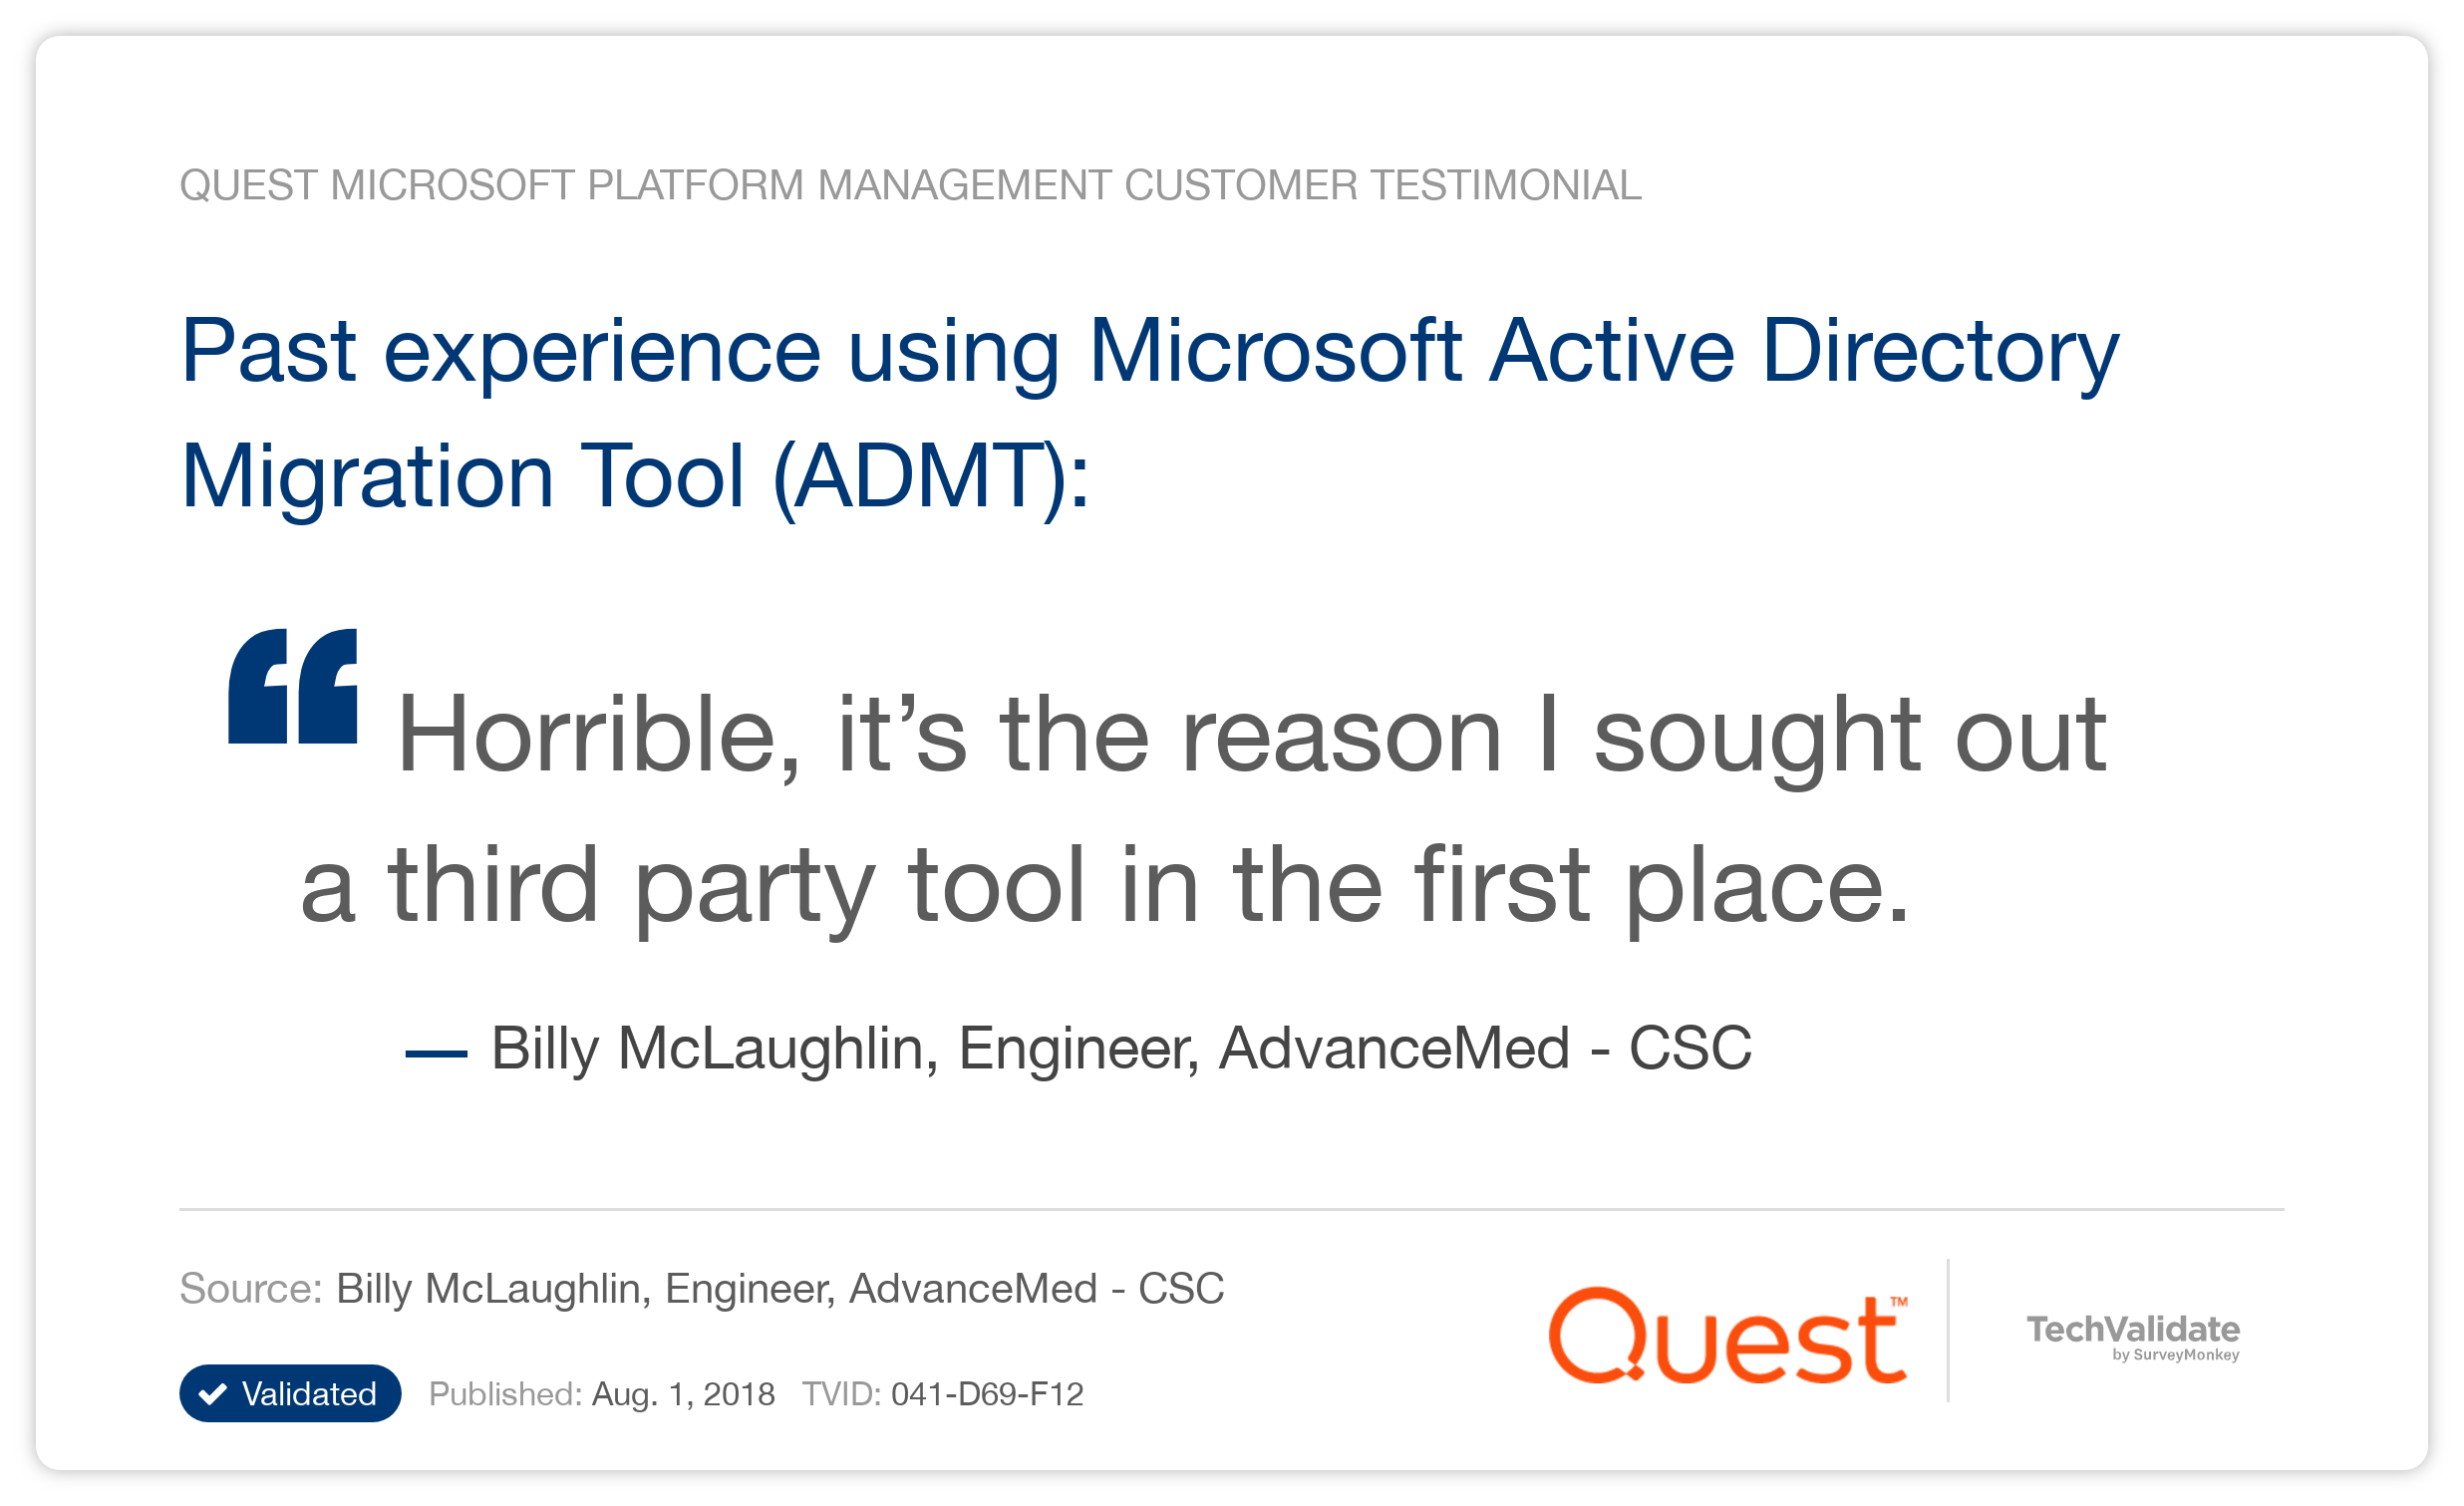 Past experience using Microsoft Active Directory Migration Tool (ADMT):